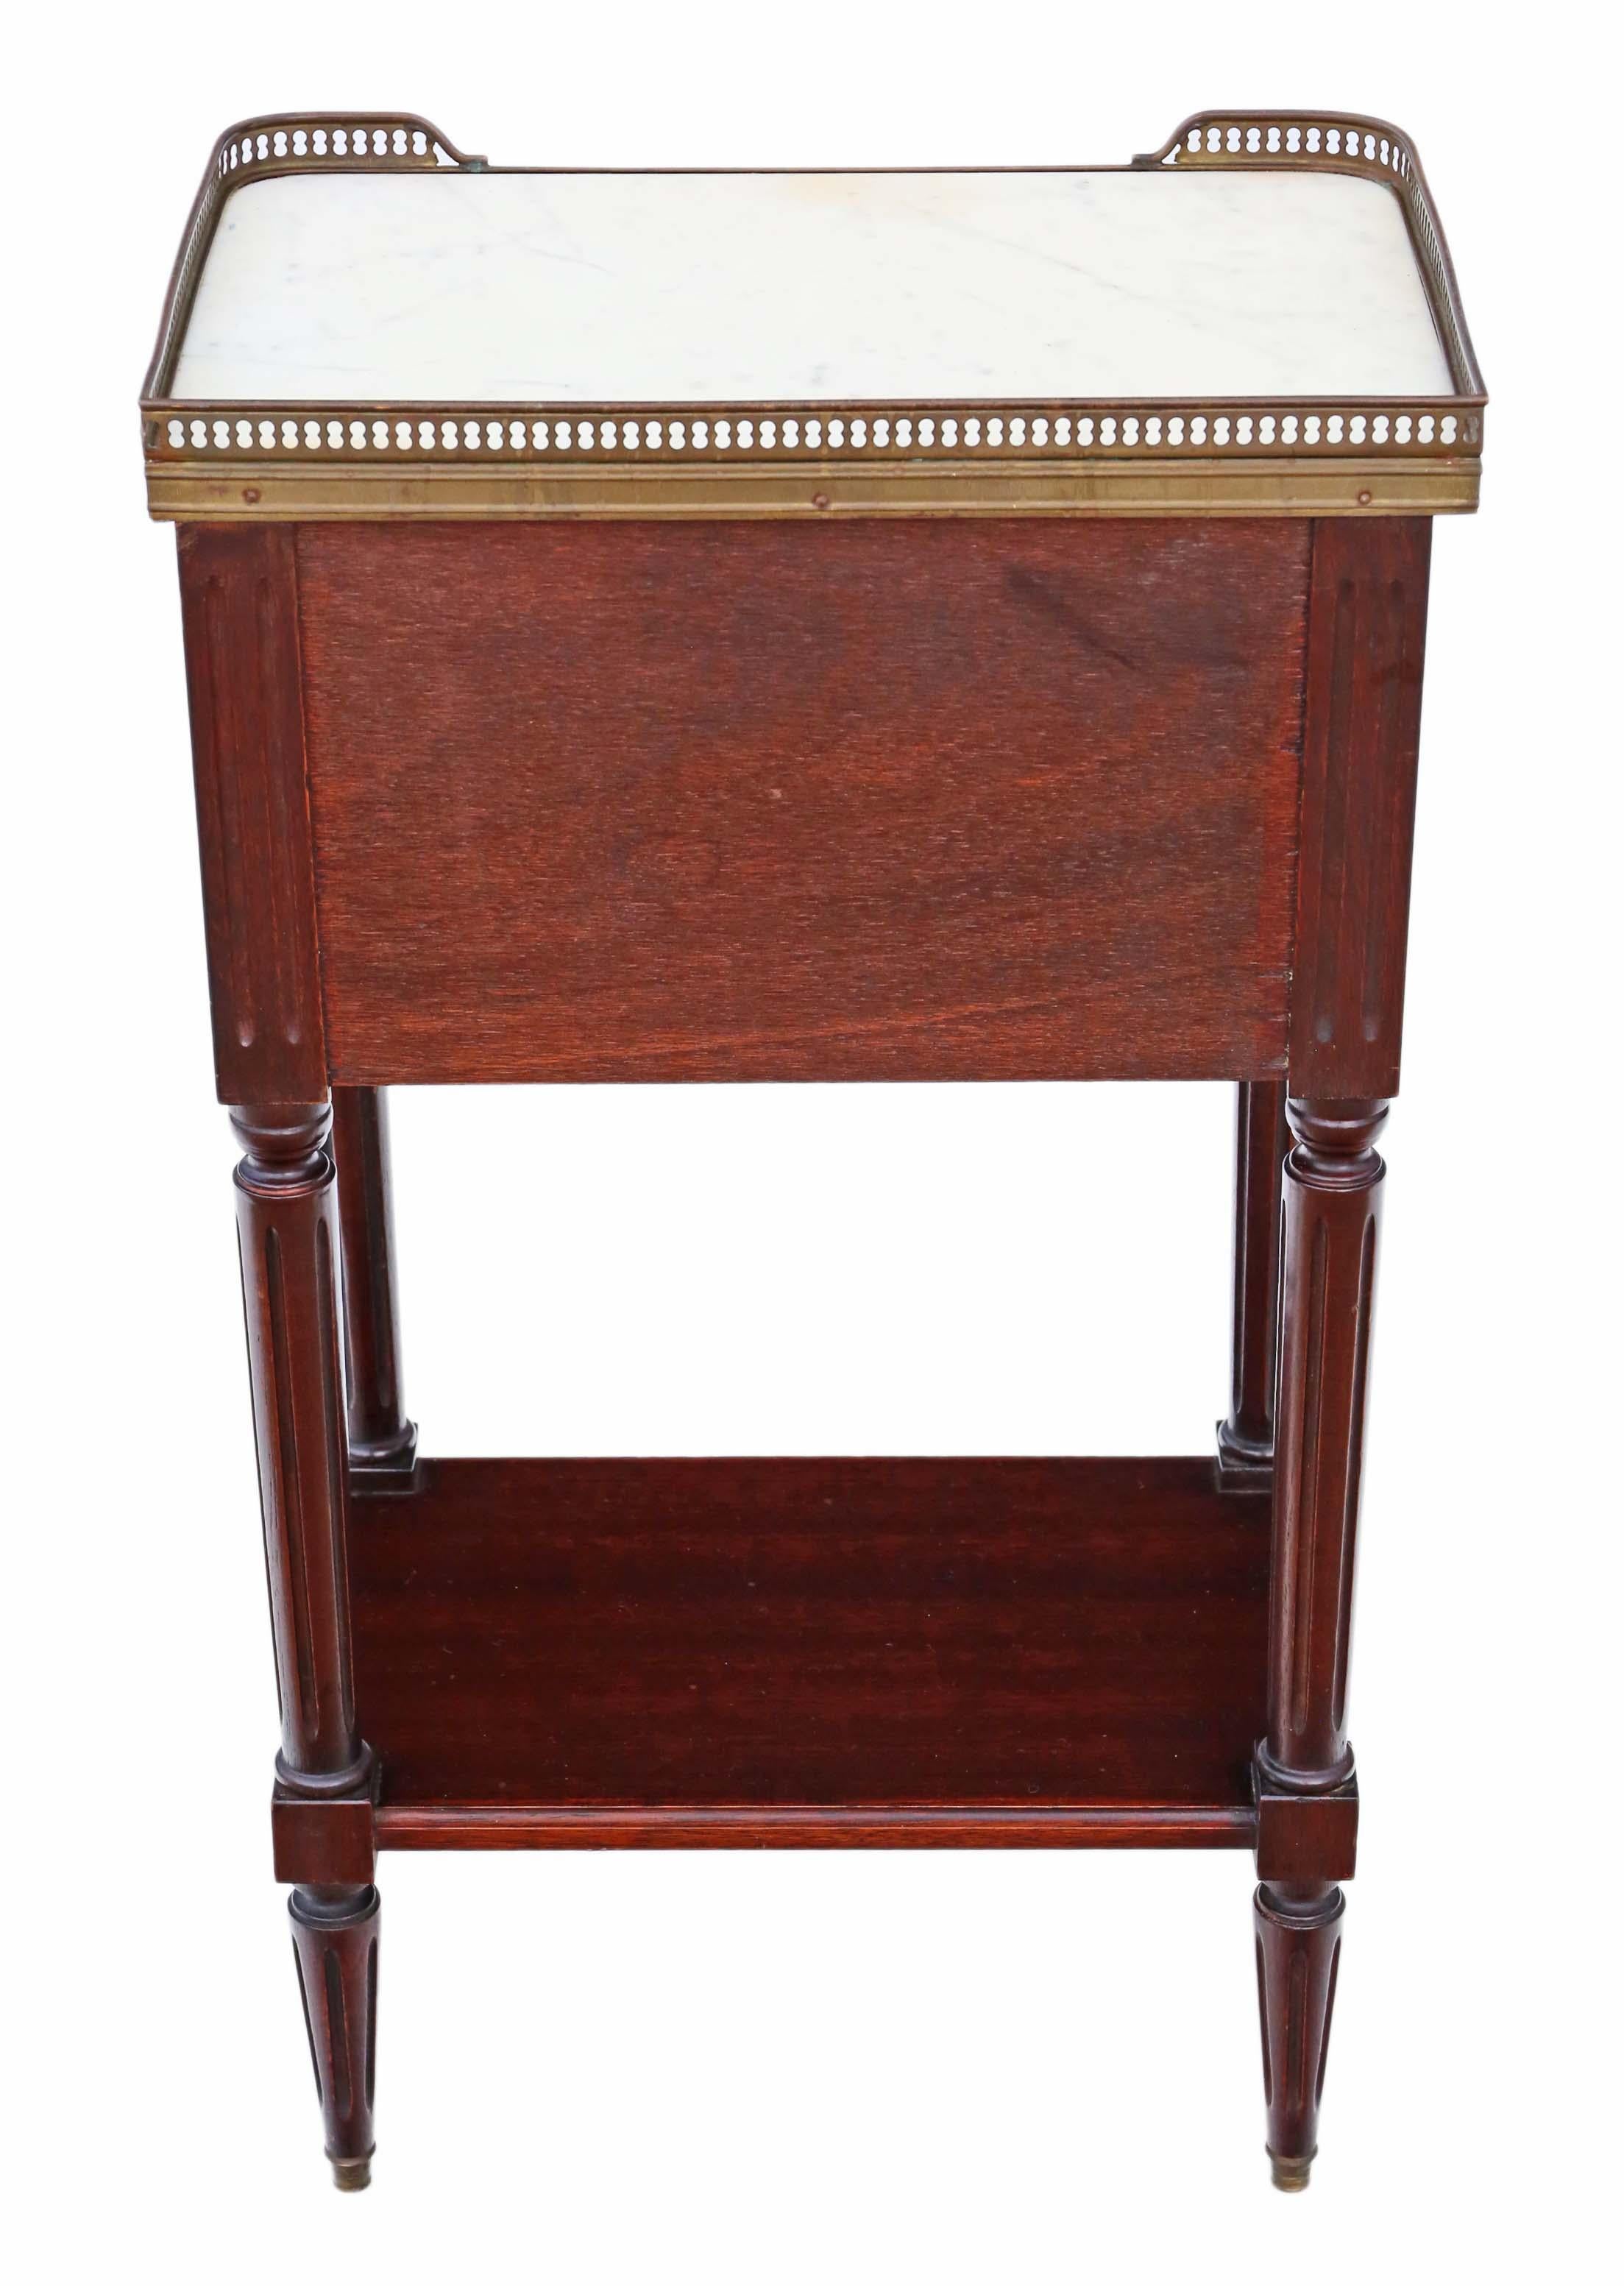 Early 20th Century French Mahogany Marble Bedside Table